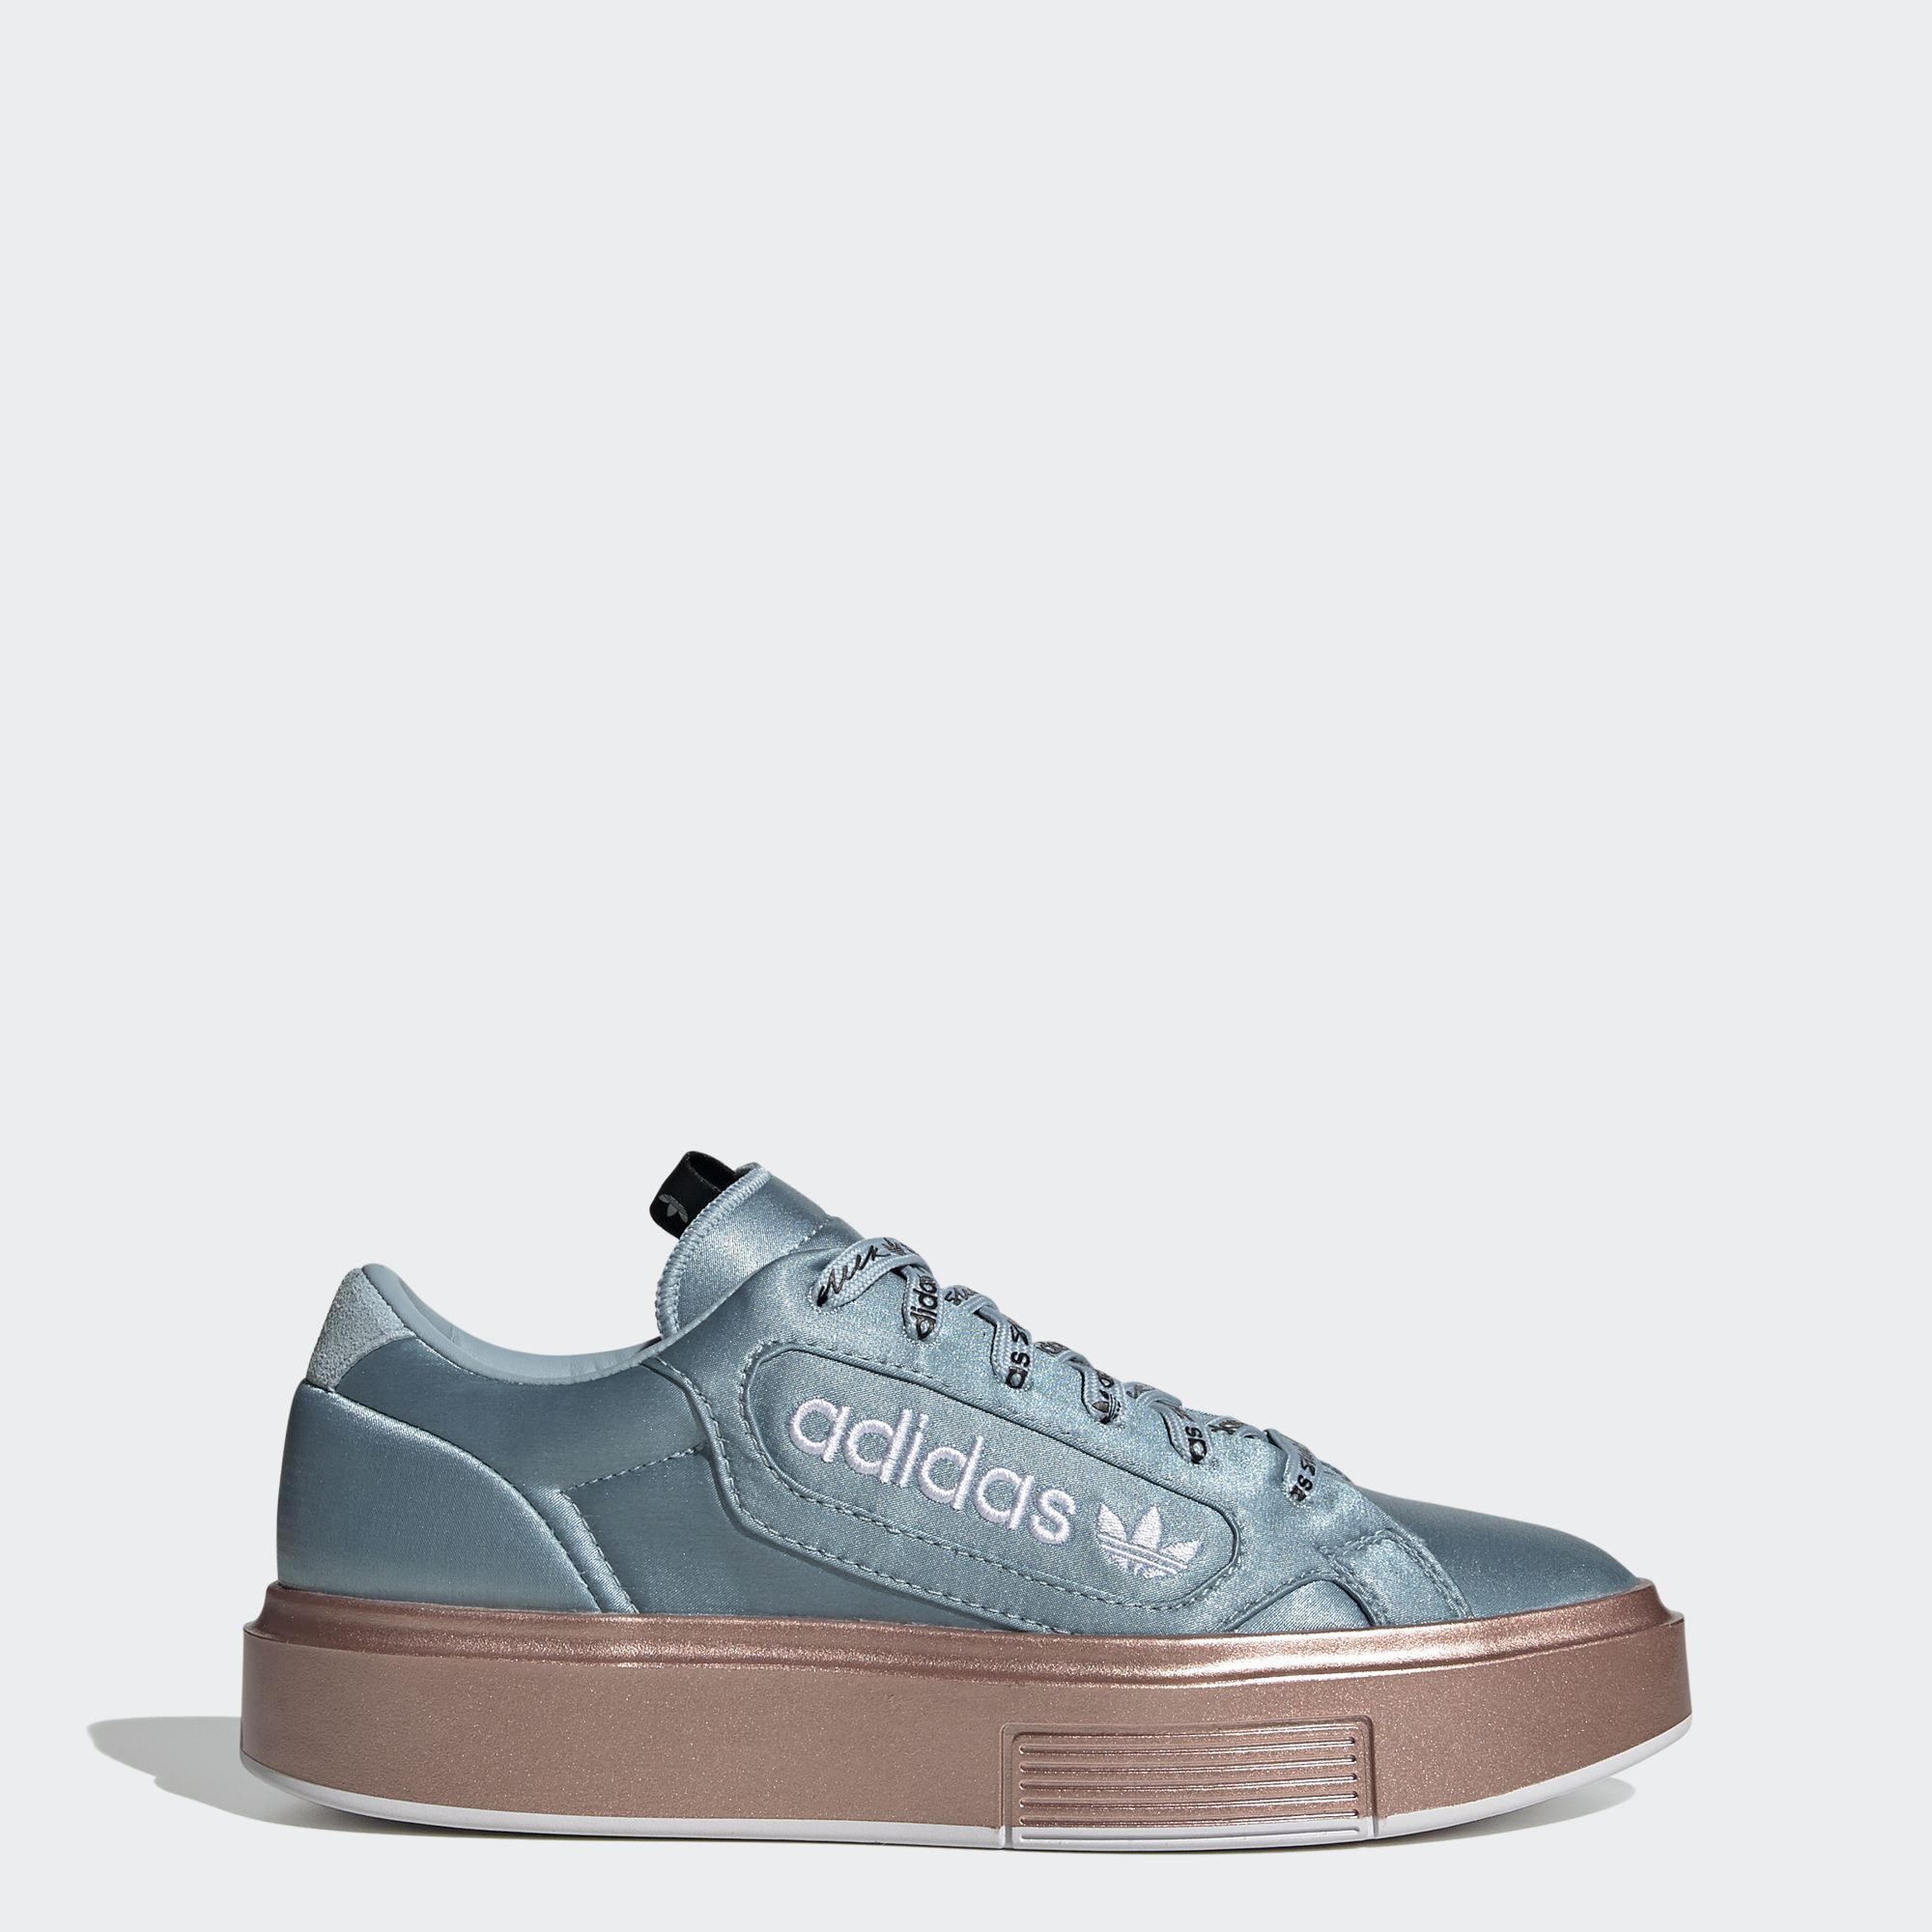 adidas womens work shoes